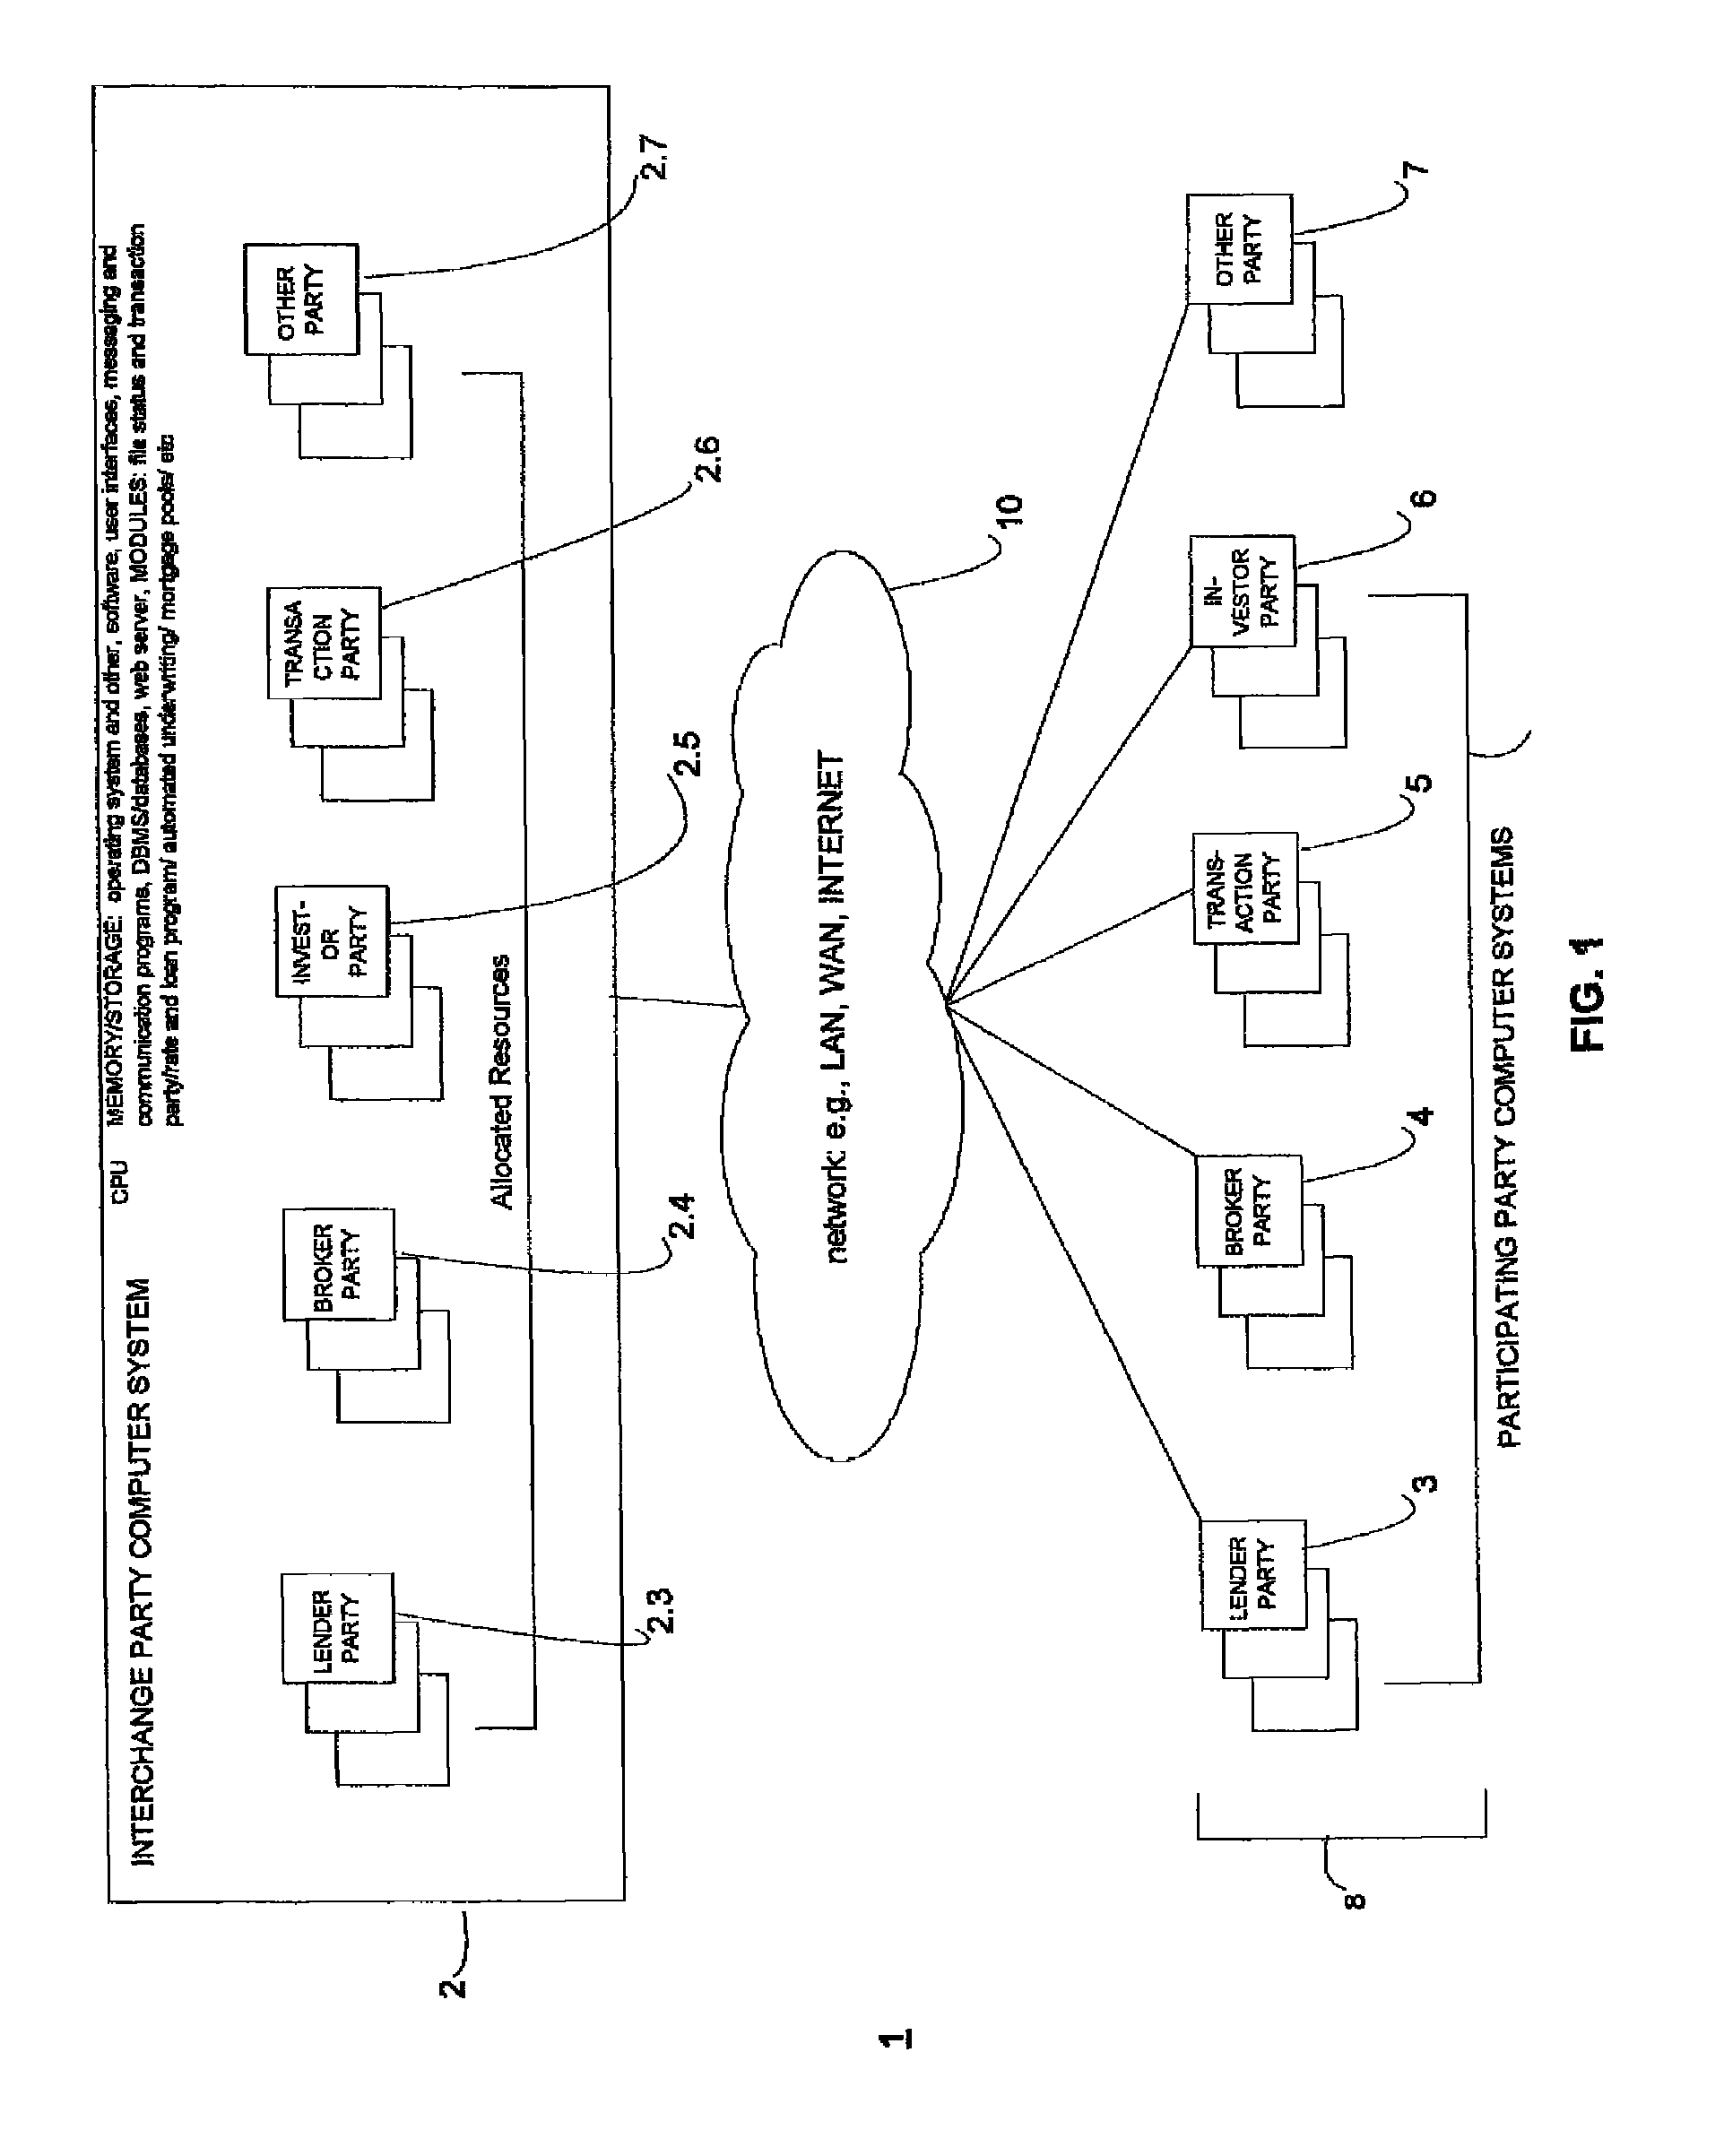 Computer system and method for networkd interchange of data and information for members of the real estate financial and related transactional services industry